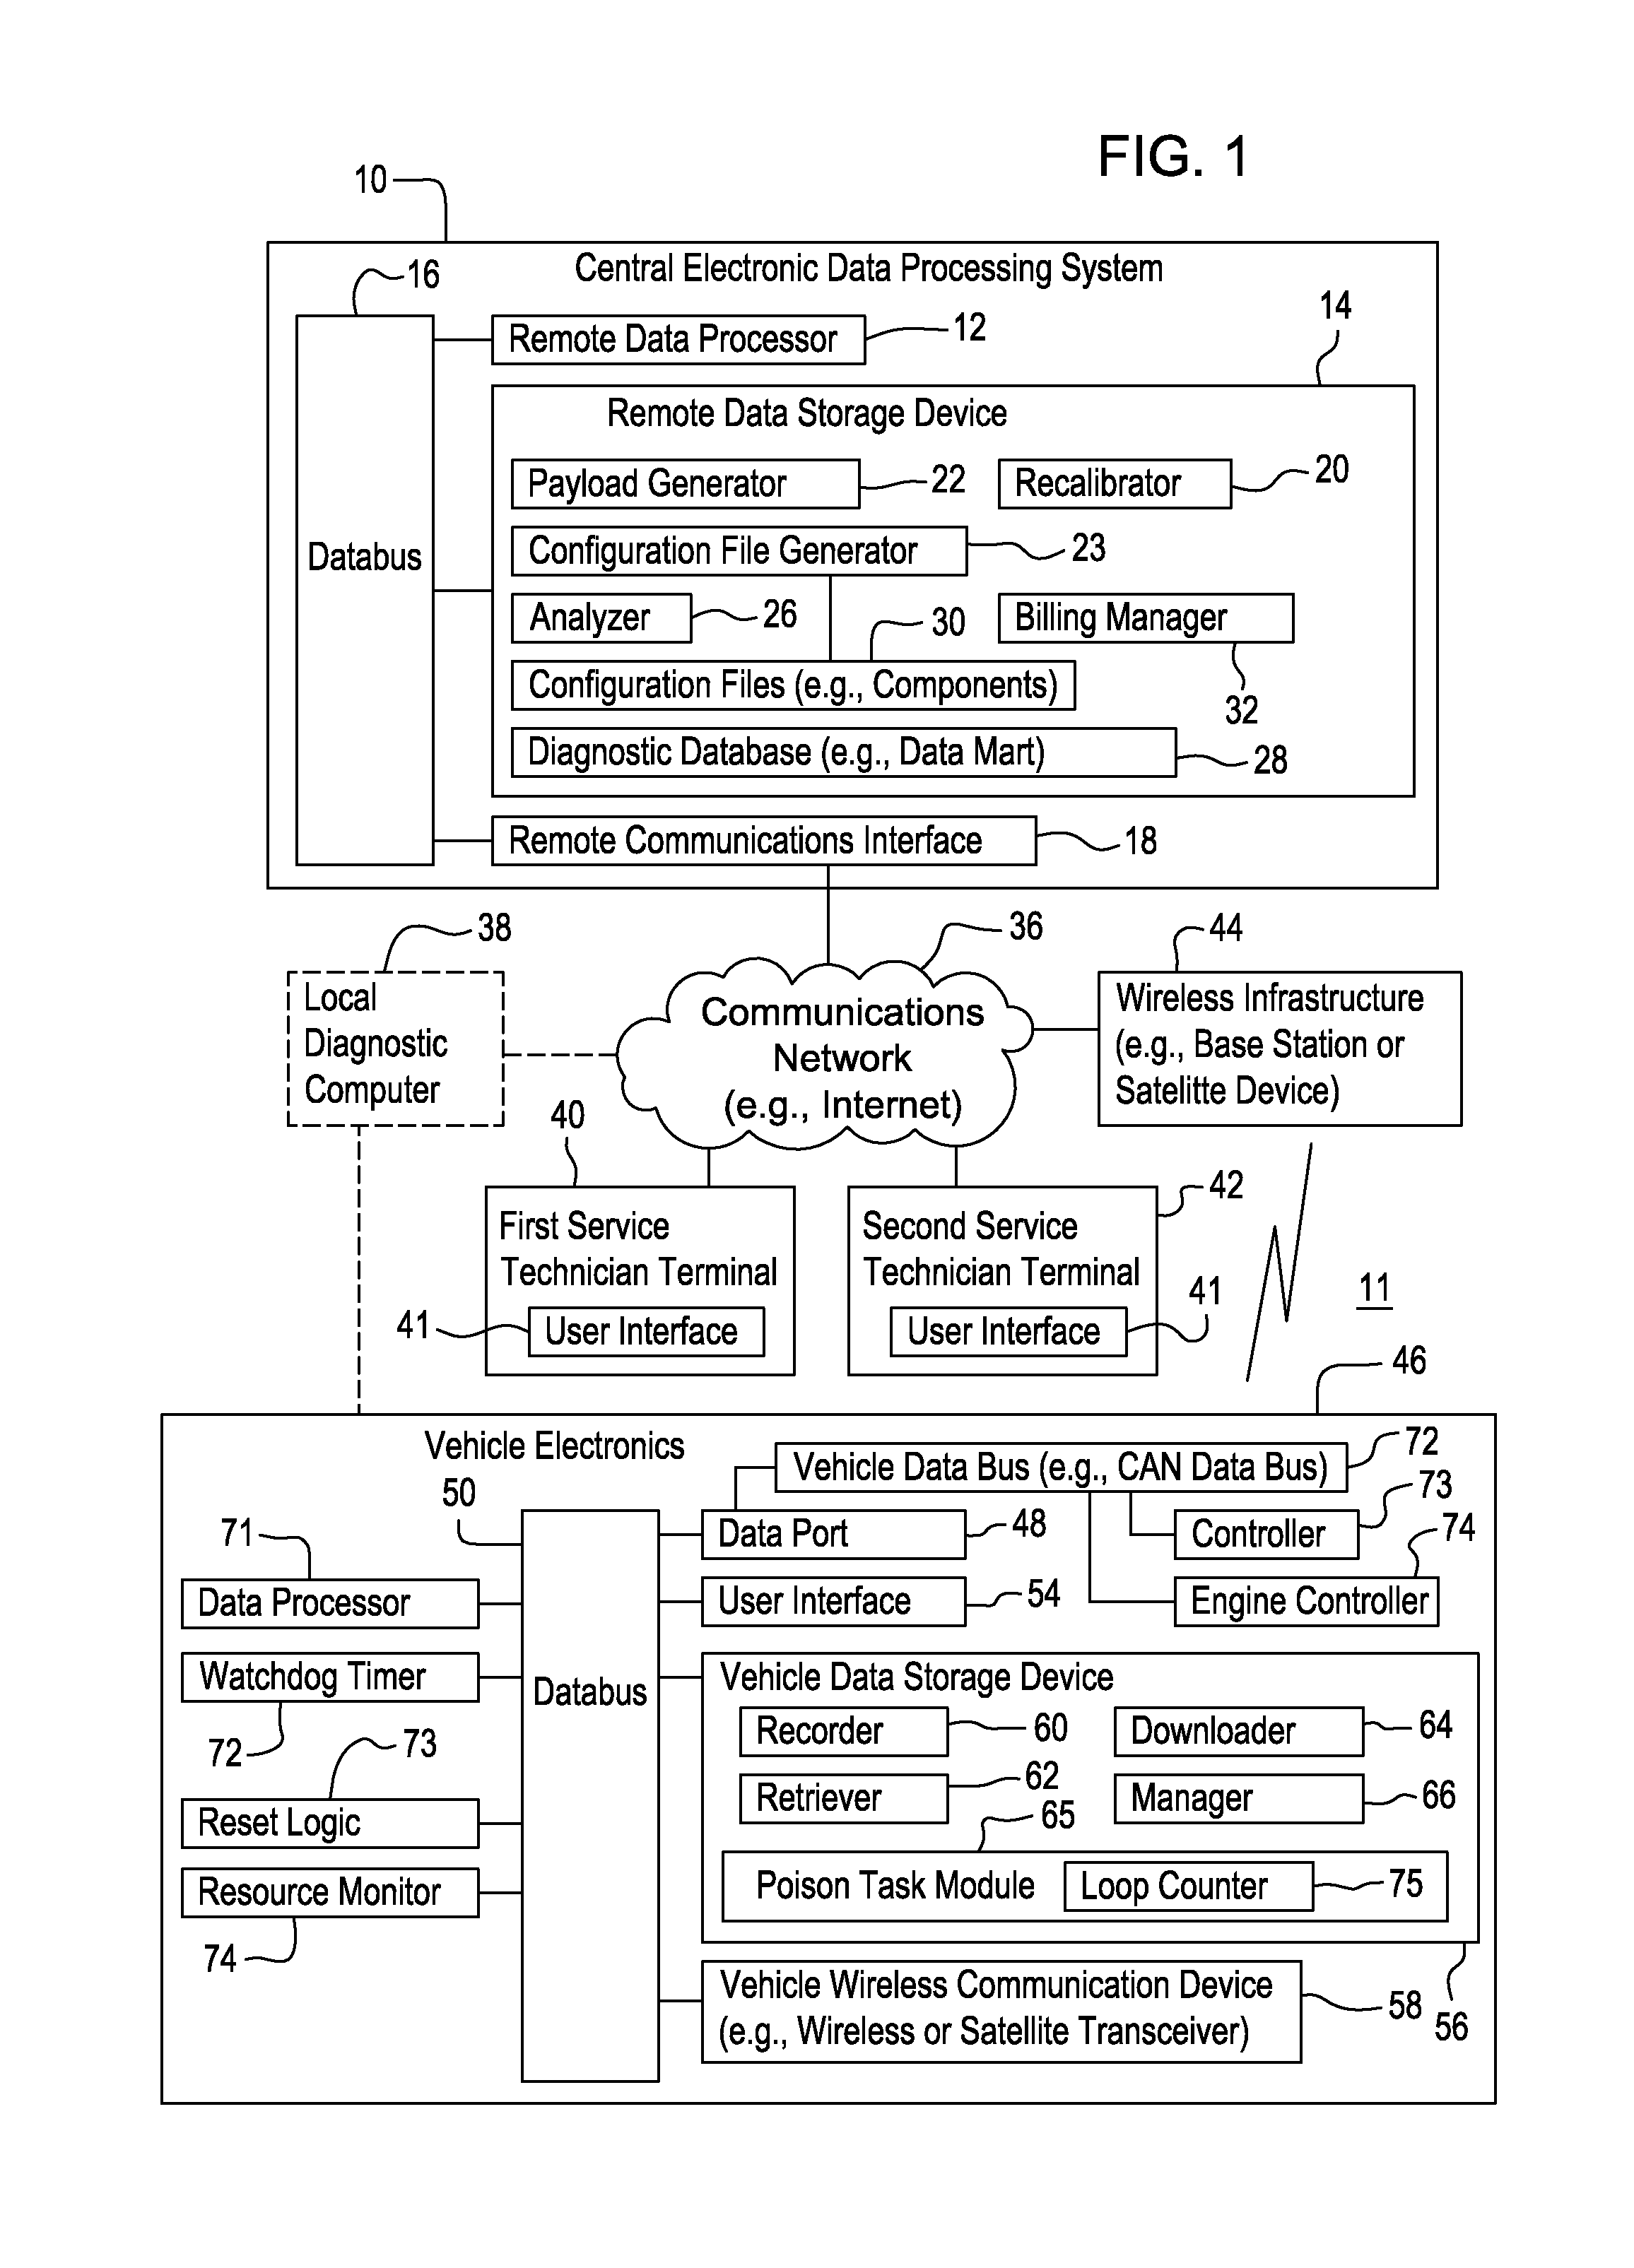 Method for performing diagnostics or software maintenance for a vehicle